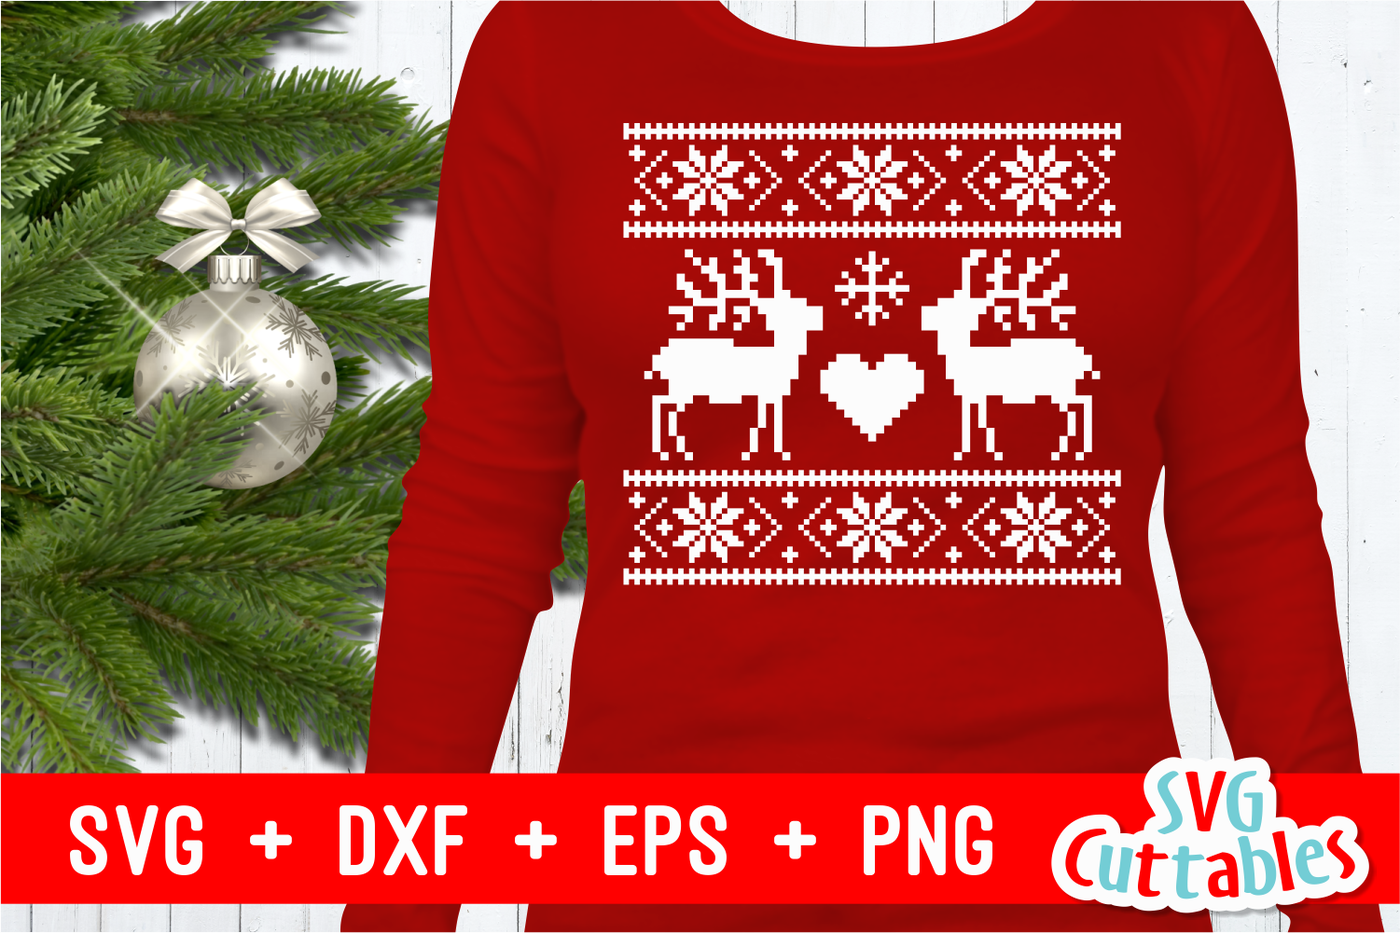 Download Reindeer Christmas Sweater By Svg Cuttables ...